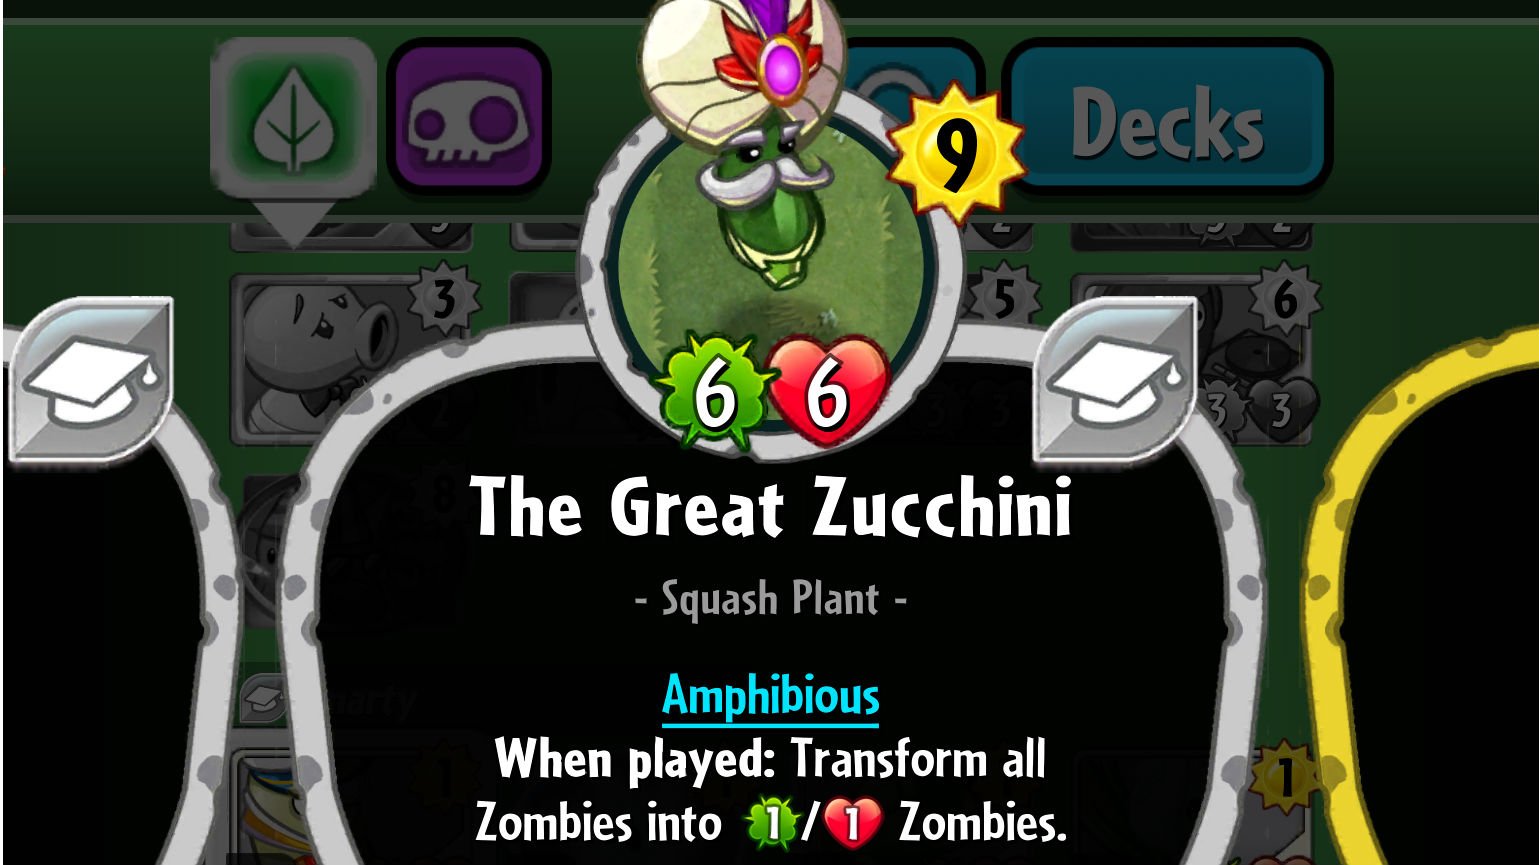 Plants vs. Zombies The Great Zucchini